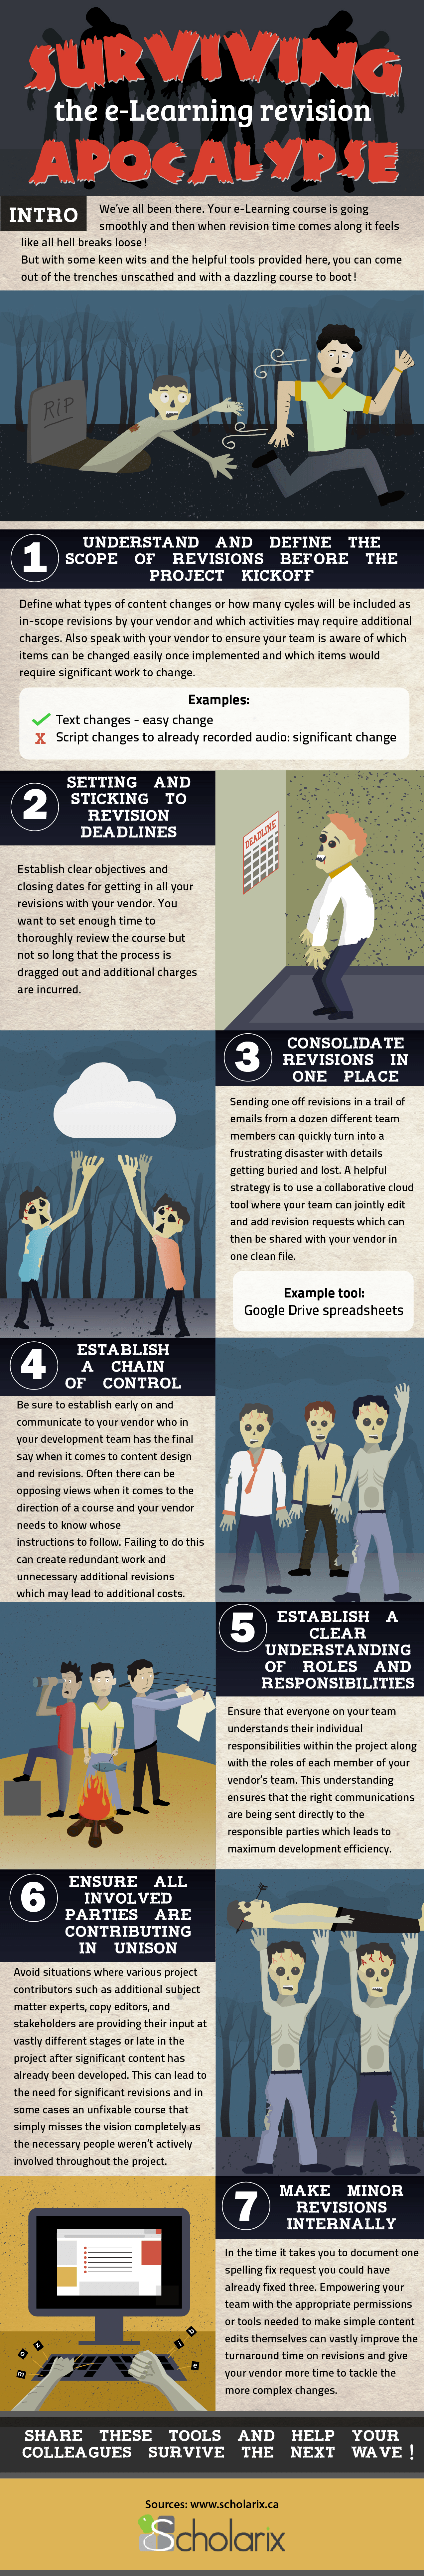 6 Tips To Survive The eLearning Apocalypse Infographic